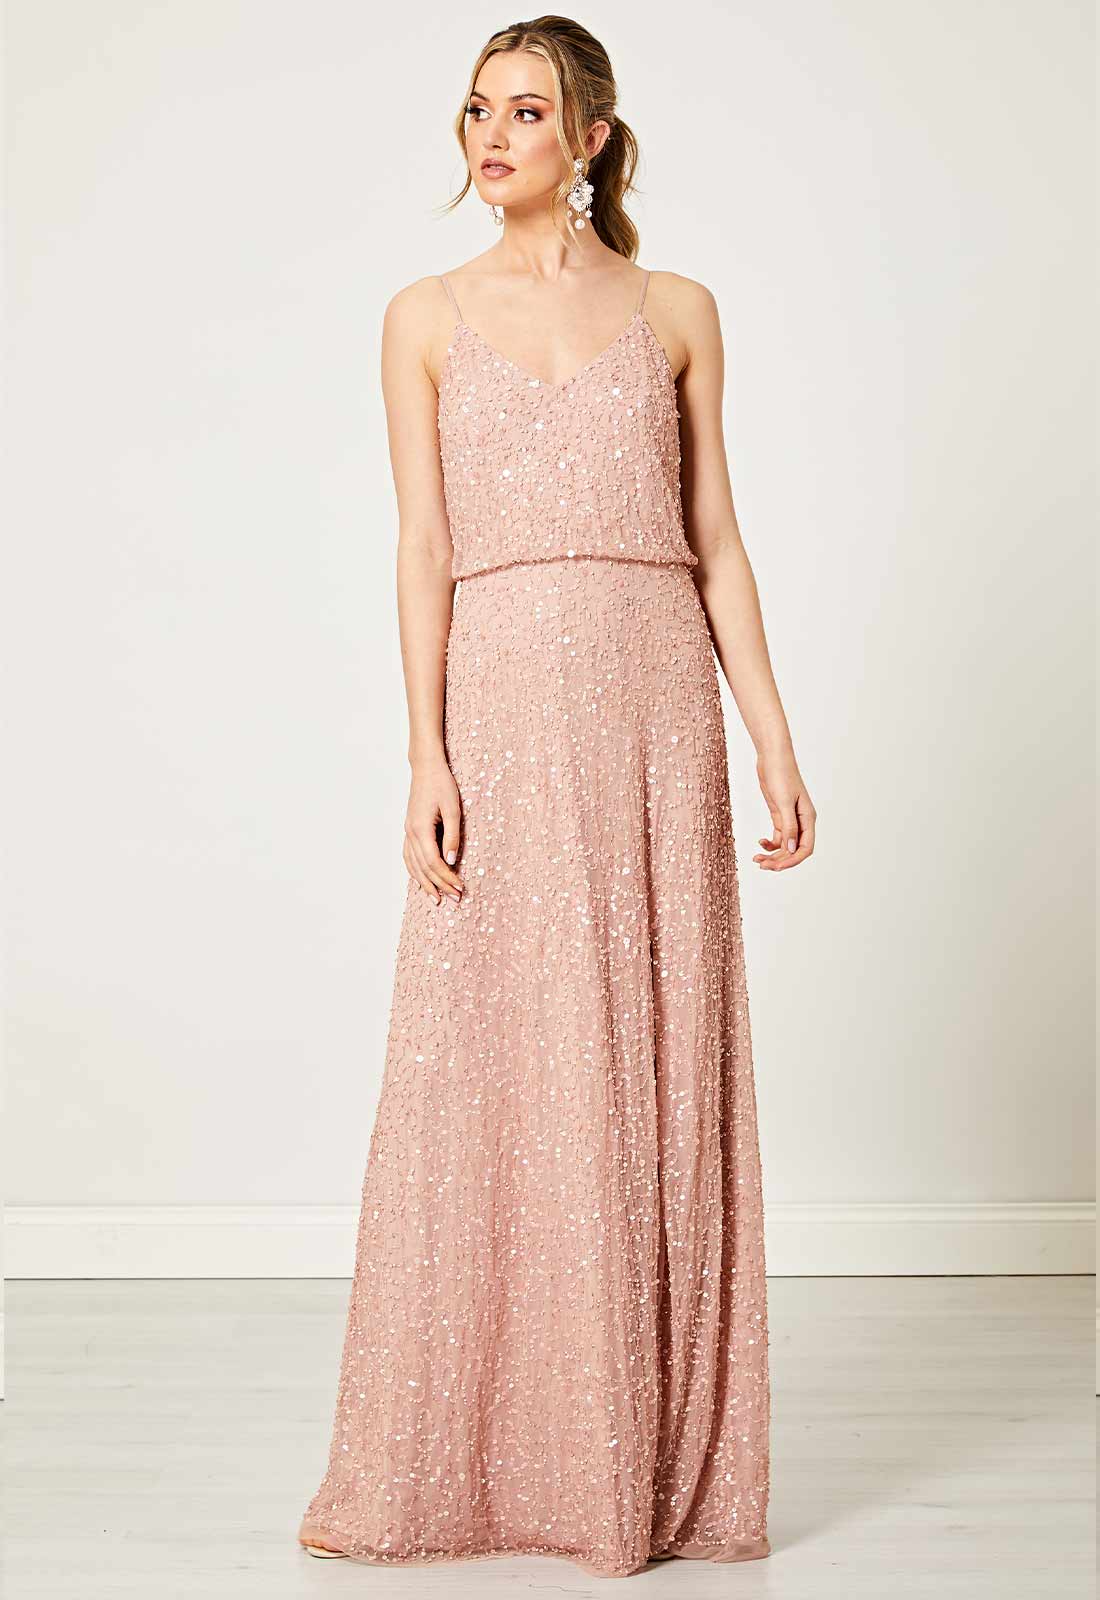 ANGELEYE Bridesmaid Embellished Maxi Sequins Dress with Slit in Pink